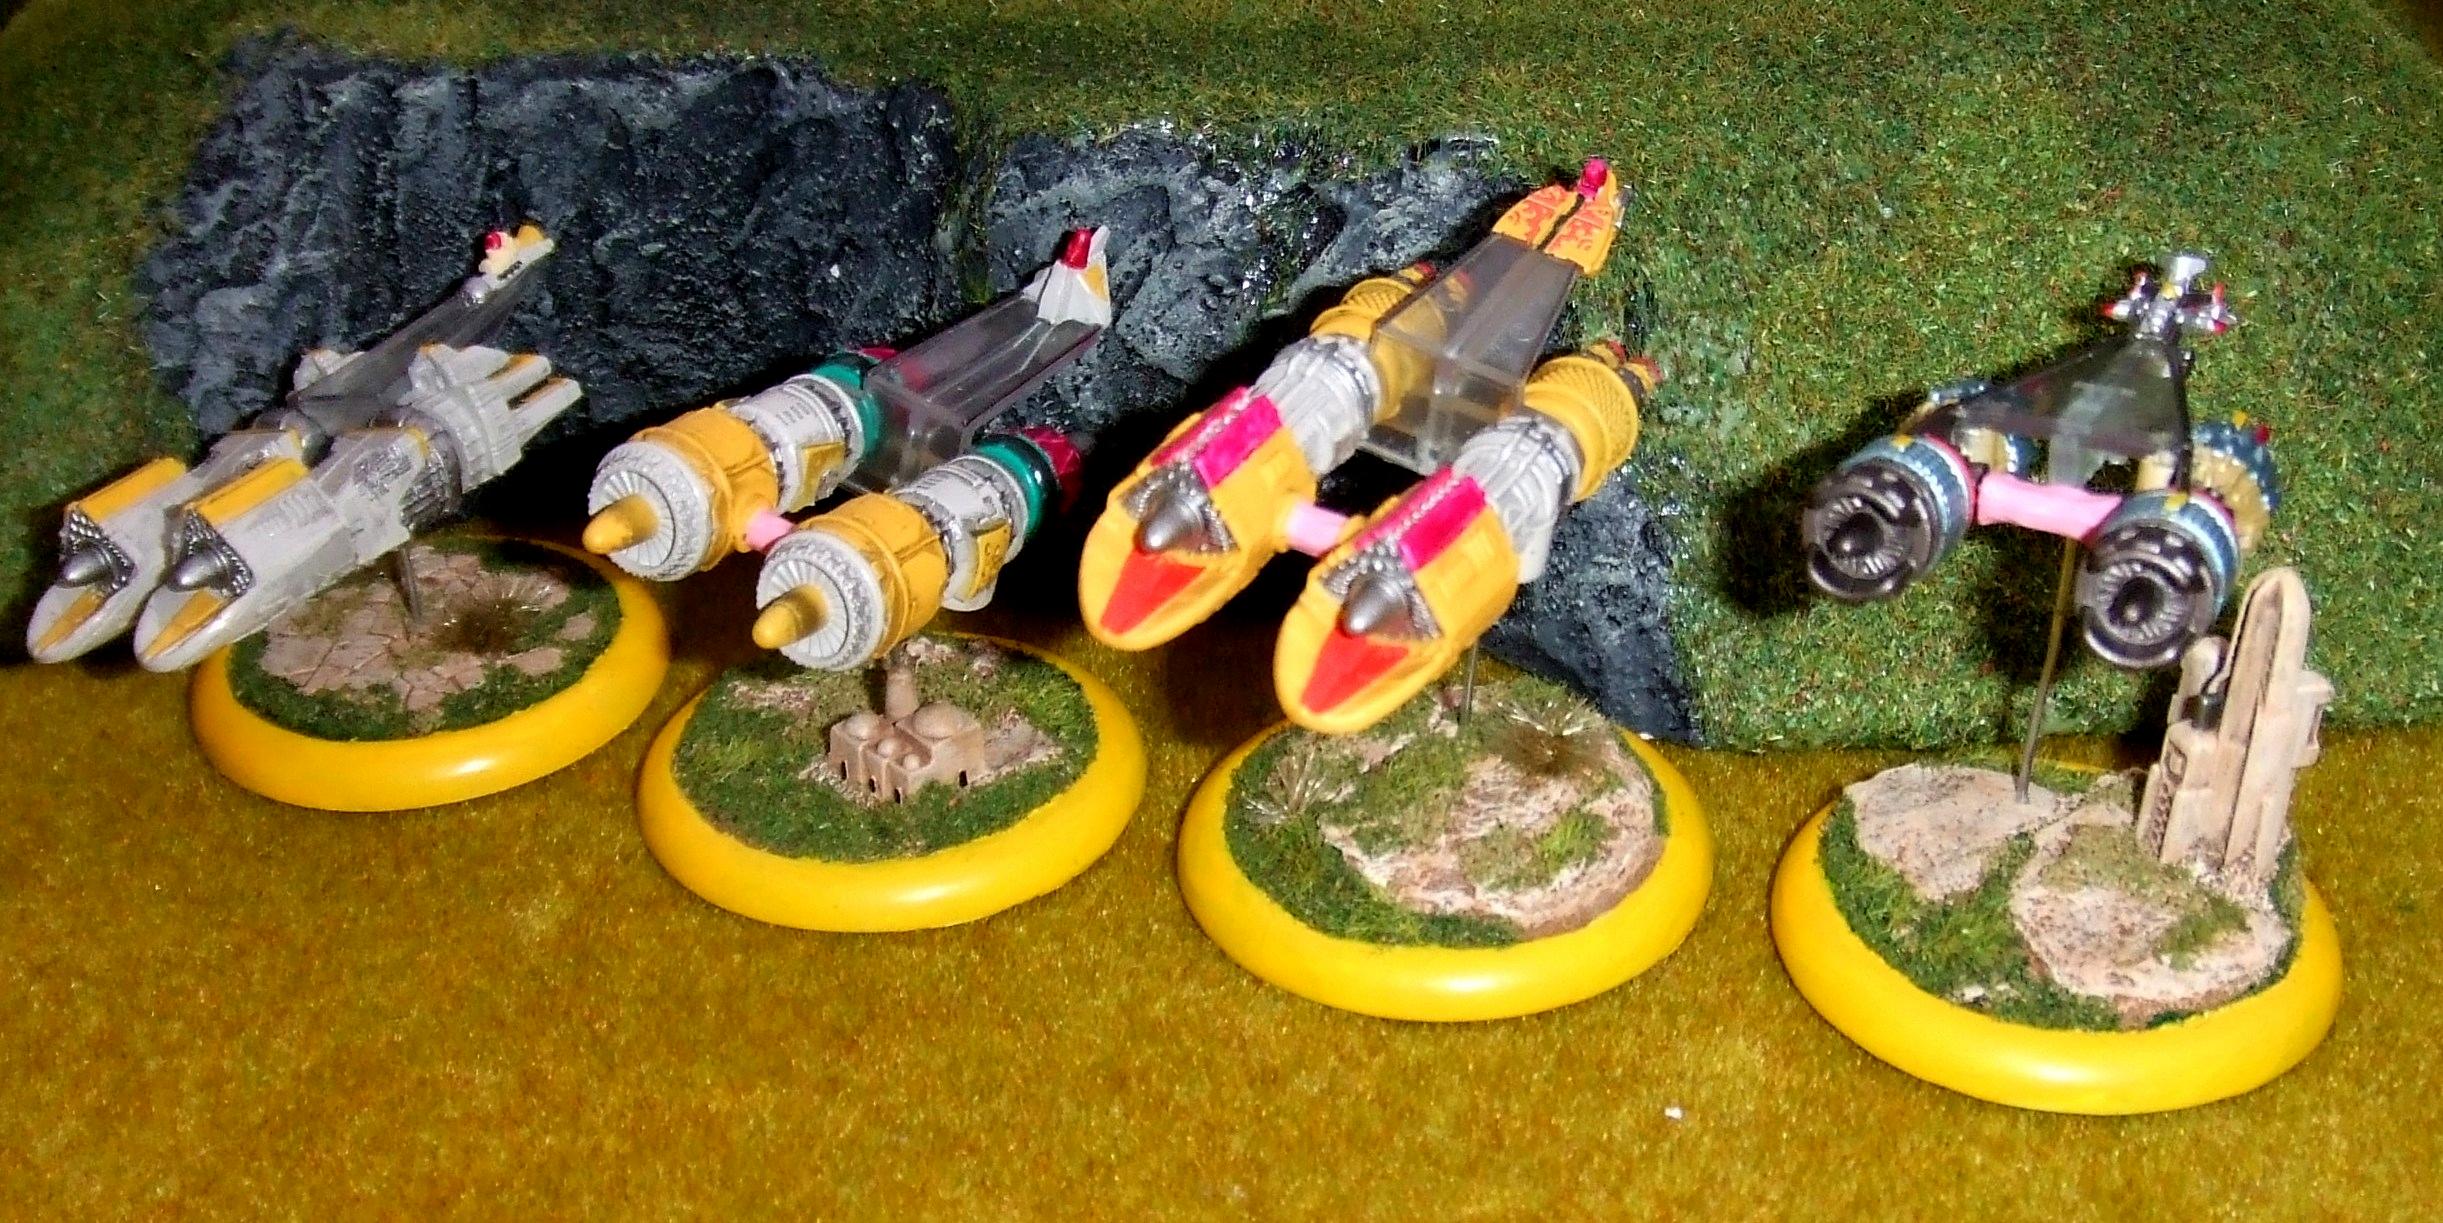 28mm, 35mm, Ds Bases, Dungeon, Hand Cast, Hordes, Naboo, New, Pod Race, Pod Racer, Pod Racing, Podrace, Rare, Resin, Roleplay, Rpg, Science-fiction, Spin Out, Spin-out, Star Wars, Starwars, Tabletop Gaming, Wargames Bakery, Wargamesbakery.co.uk, Warhammer Fantasy, Warmachine, Wgb